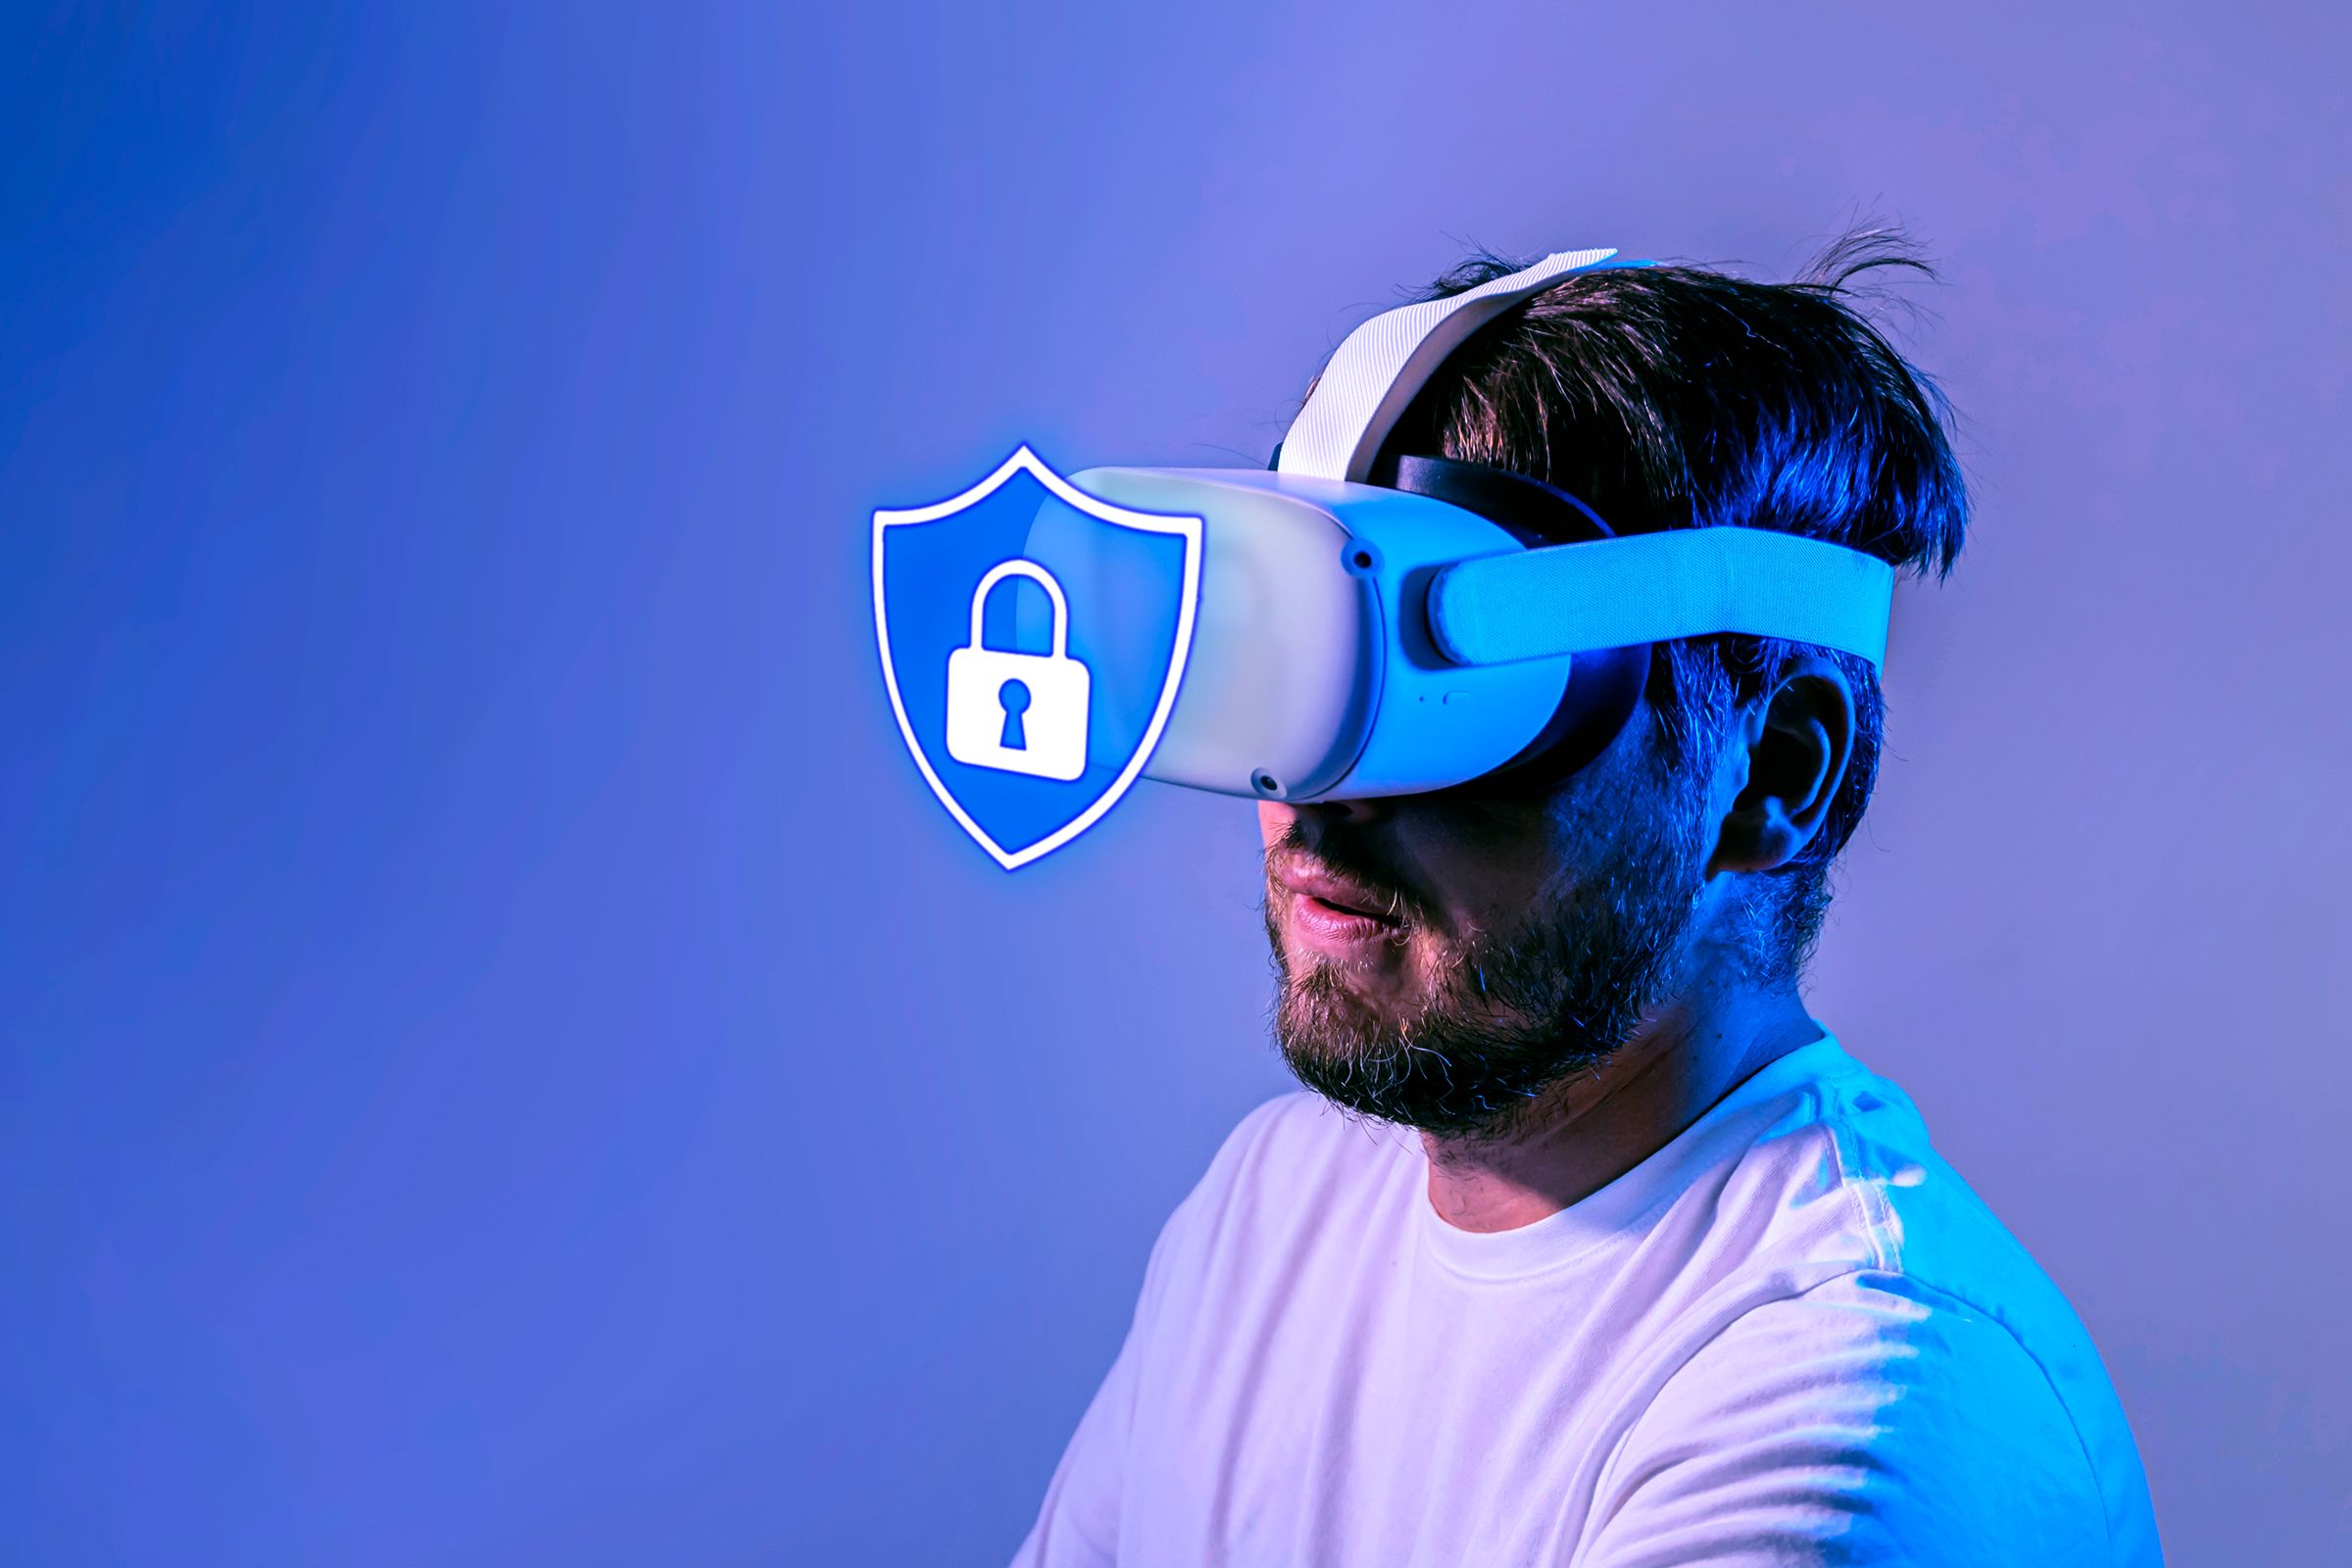 A man wearing a Meta VR headset with a security shield icon in front.